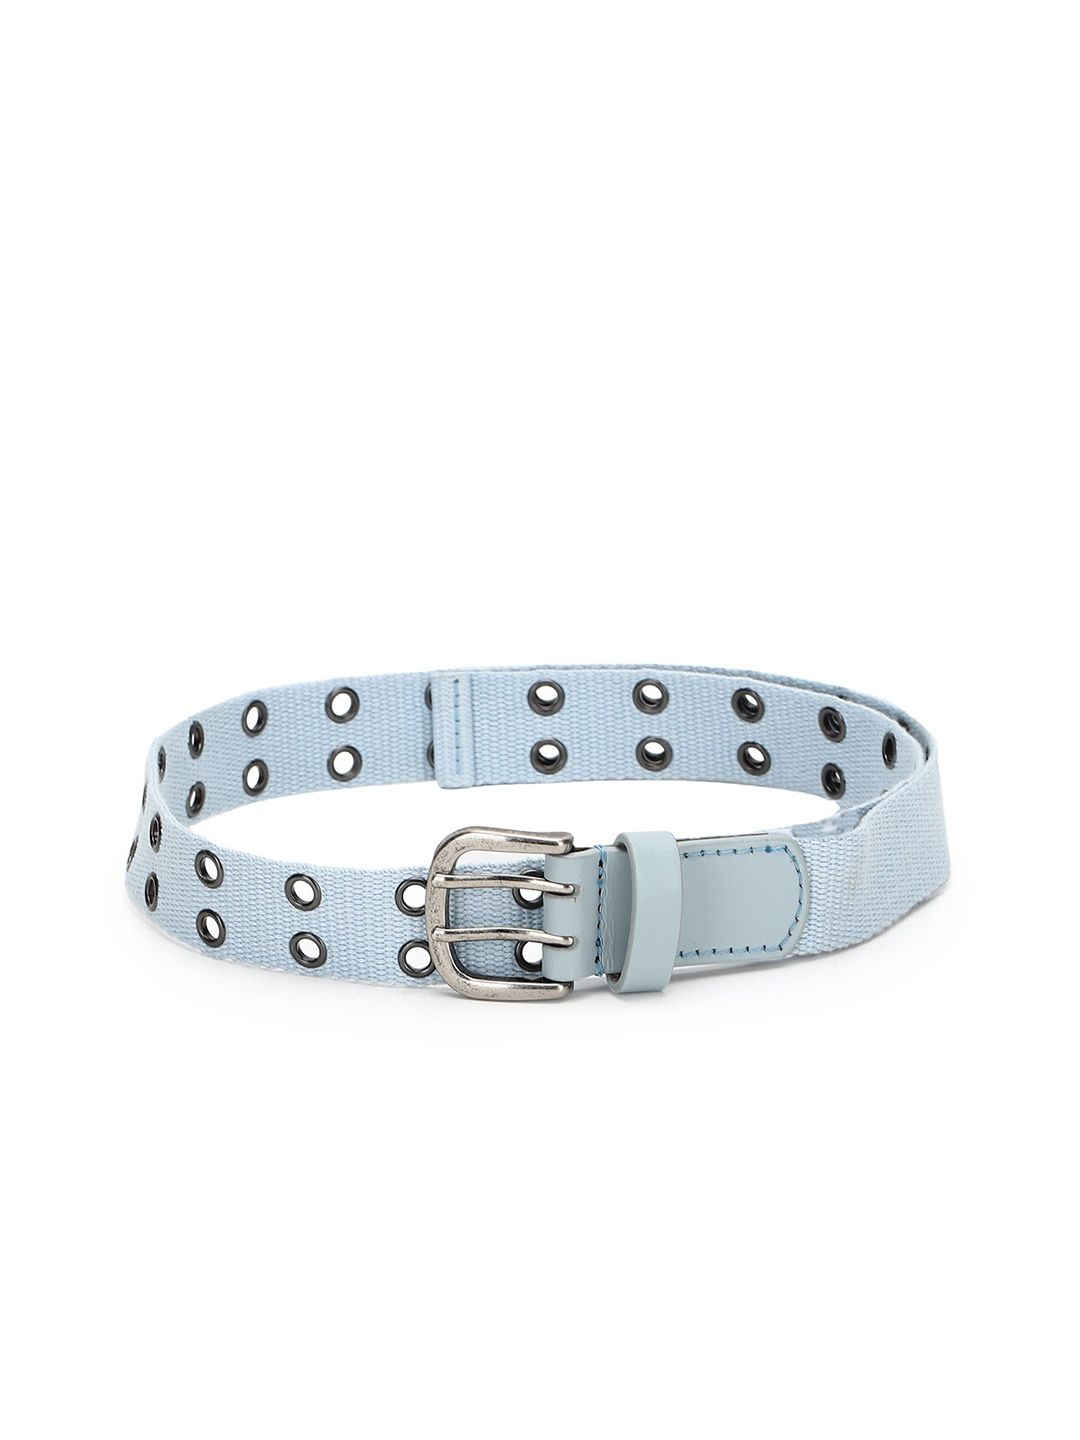 AMERICAN EAGLE OUTFITTERS Women Blue Embellished Belt Price in India